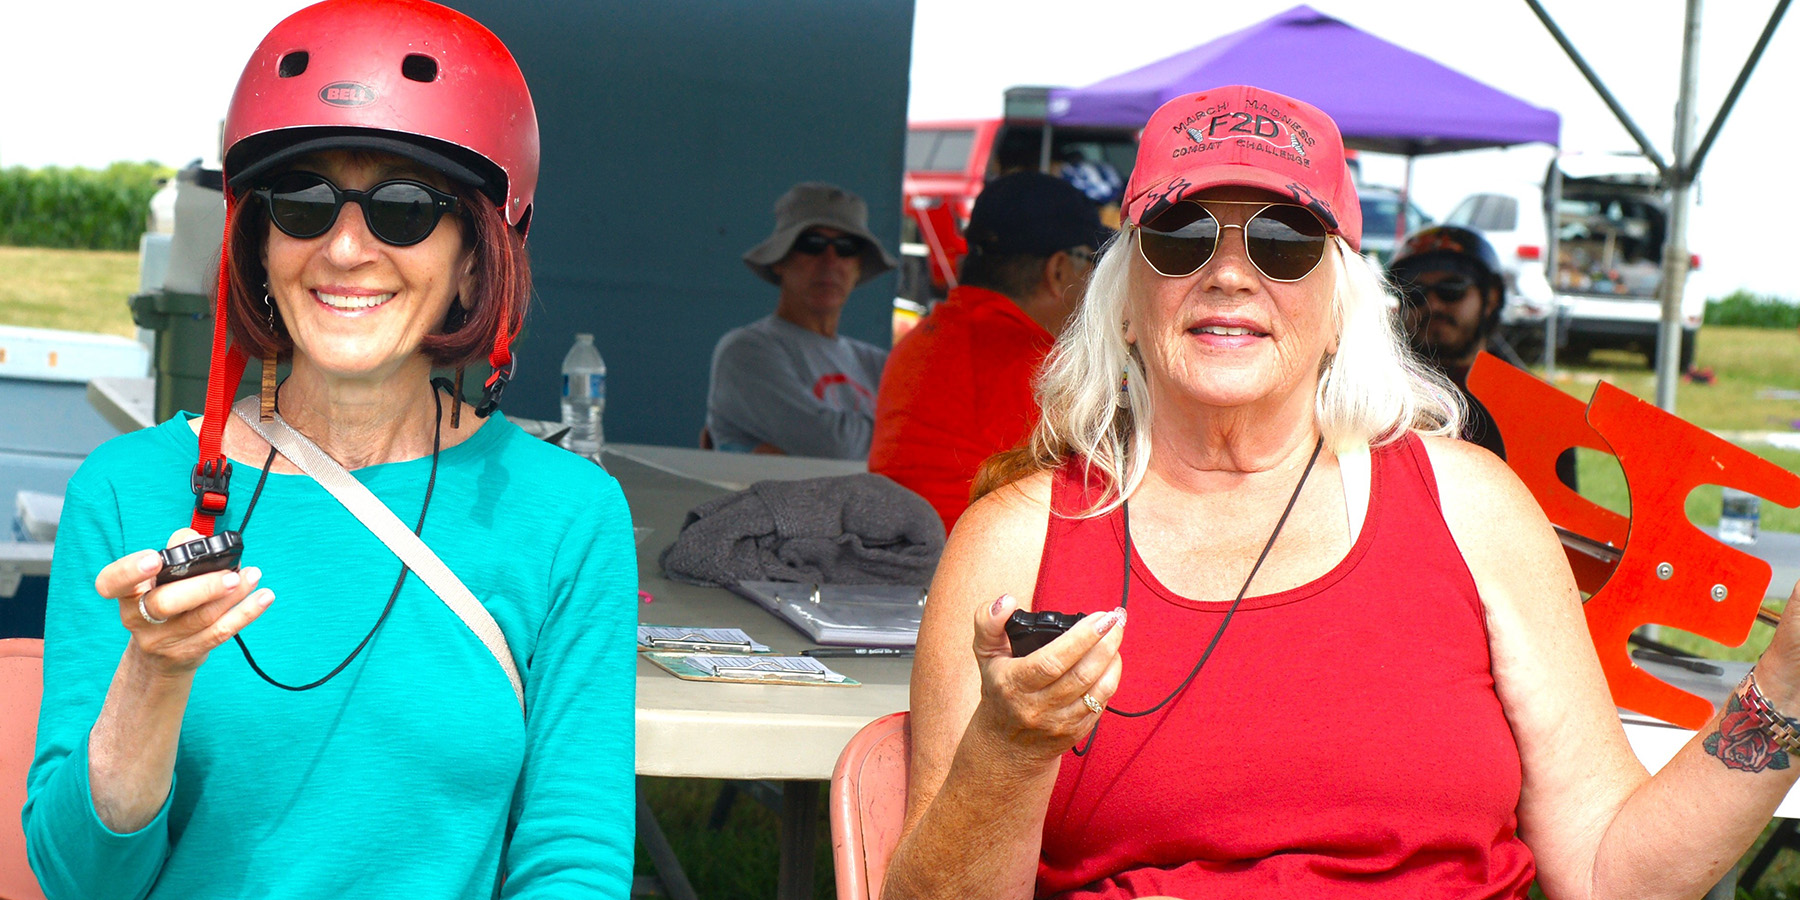 Muffy Rudner (left) and Tammy Jo Johnson judged Speed Limit Combat, as well as F2d Fast Combat on the previous day.